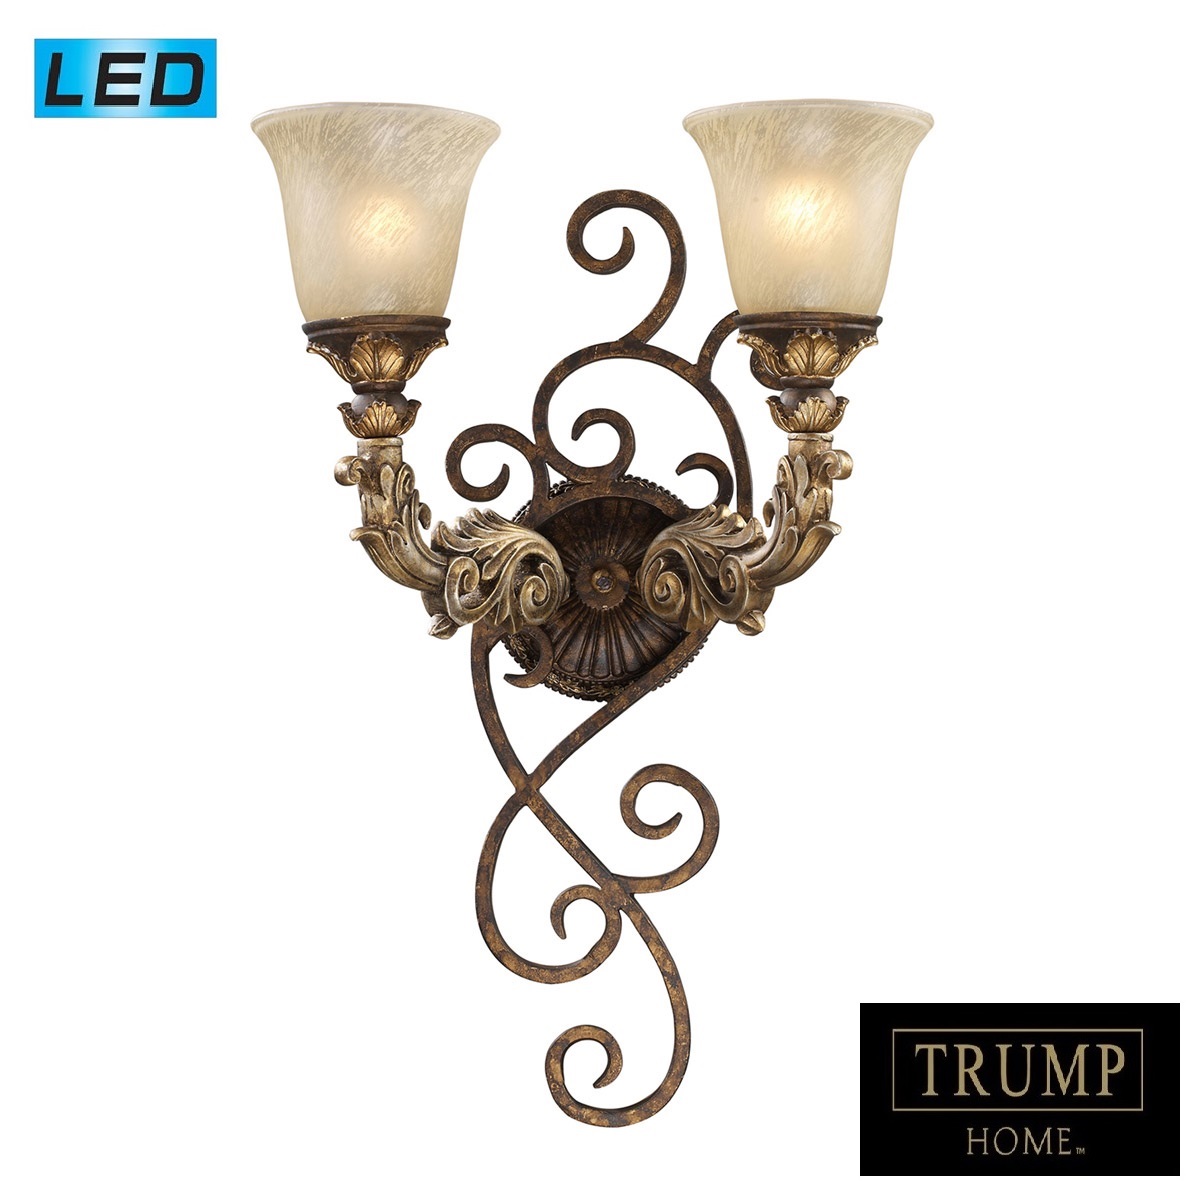 ELK Lighting, Candle Sconces for Walls, Brooklyn, Accentuations Brand, Furniture by ABD   